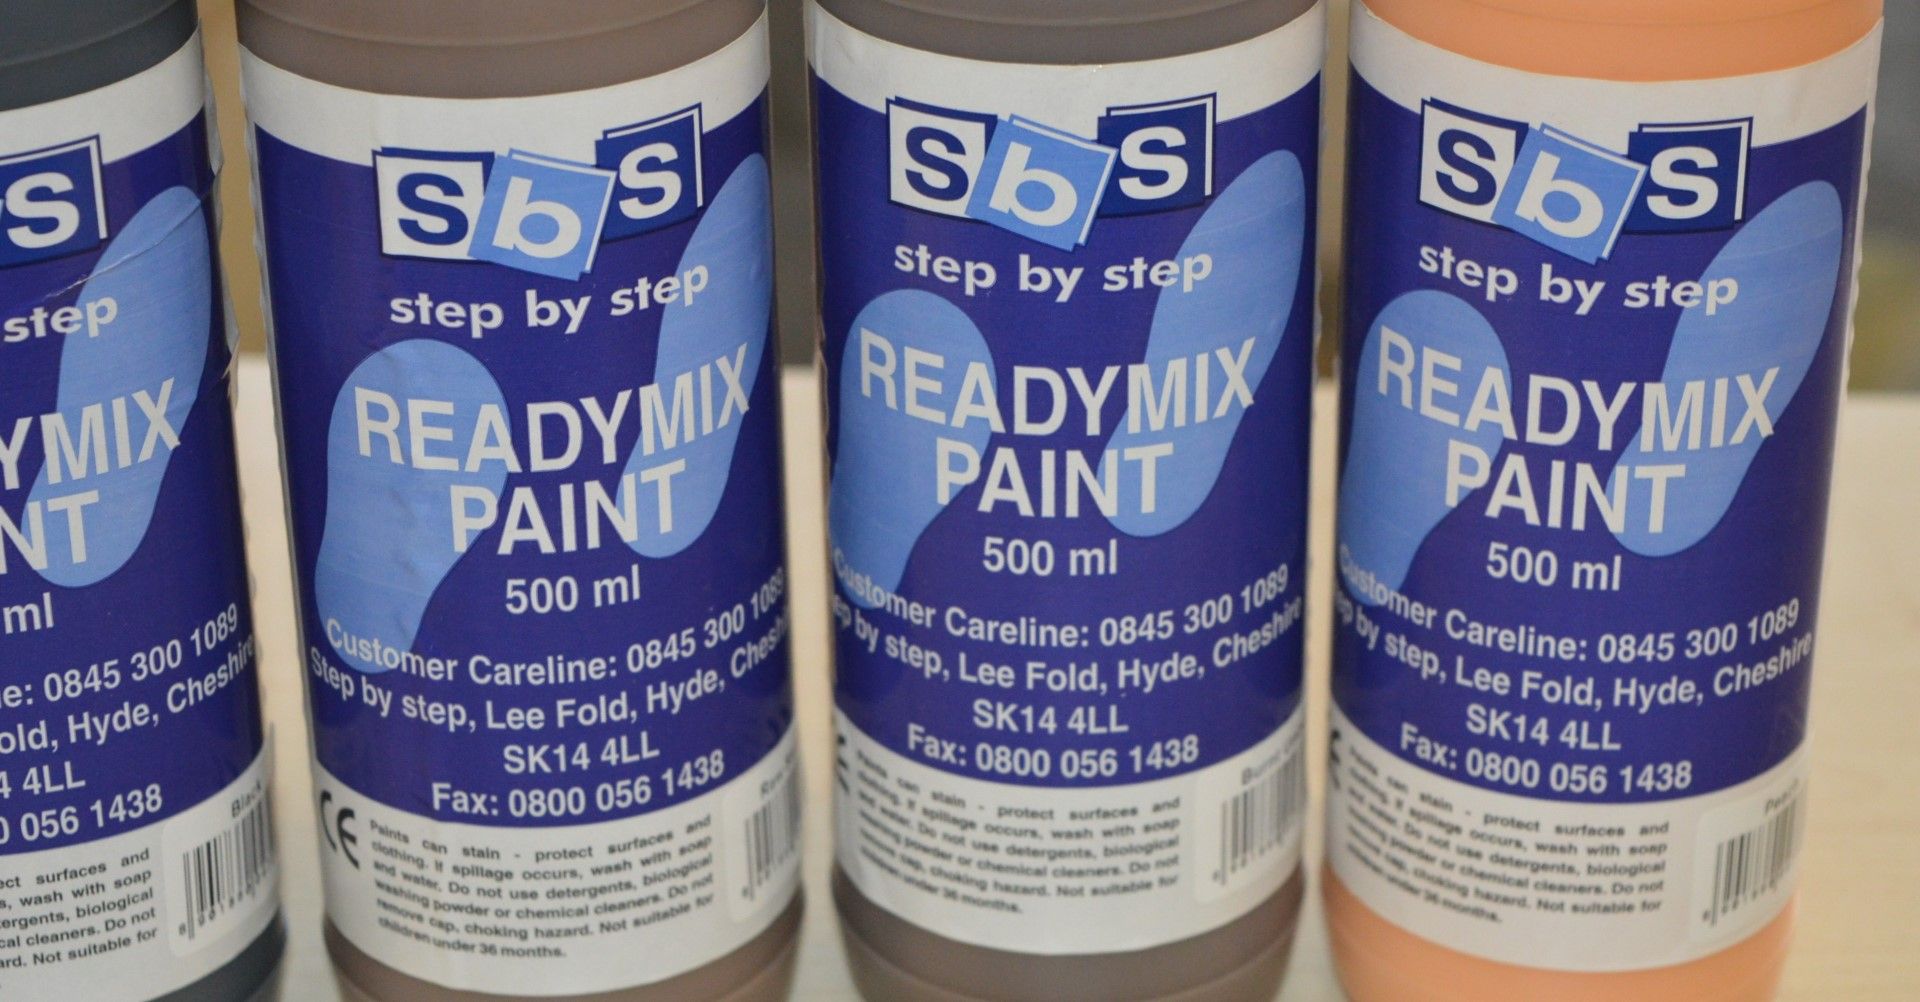 6 x Sets of SBS Step by Step Readymix Paint - 36 x 500ml Bottles - 6 x Sets of 6 Bottles - Unused - Image 8 of 8